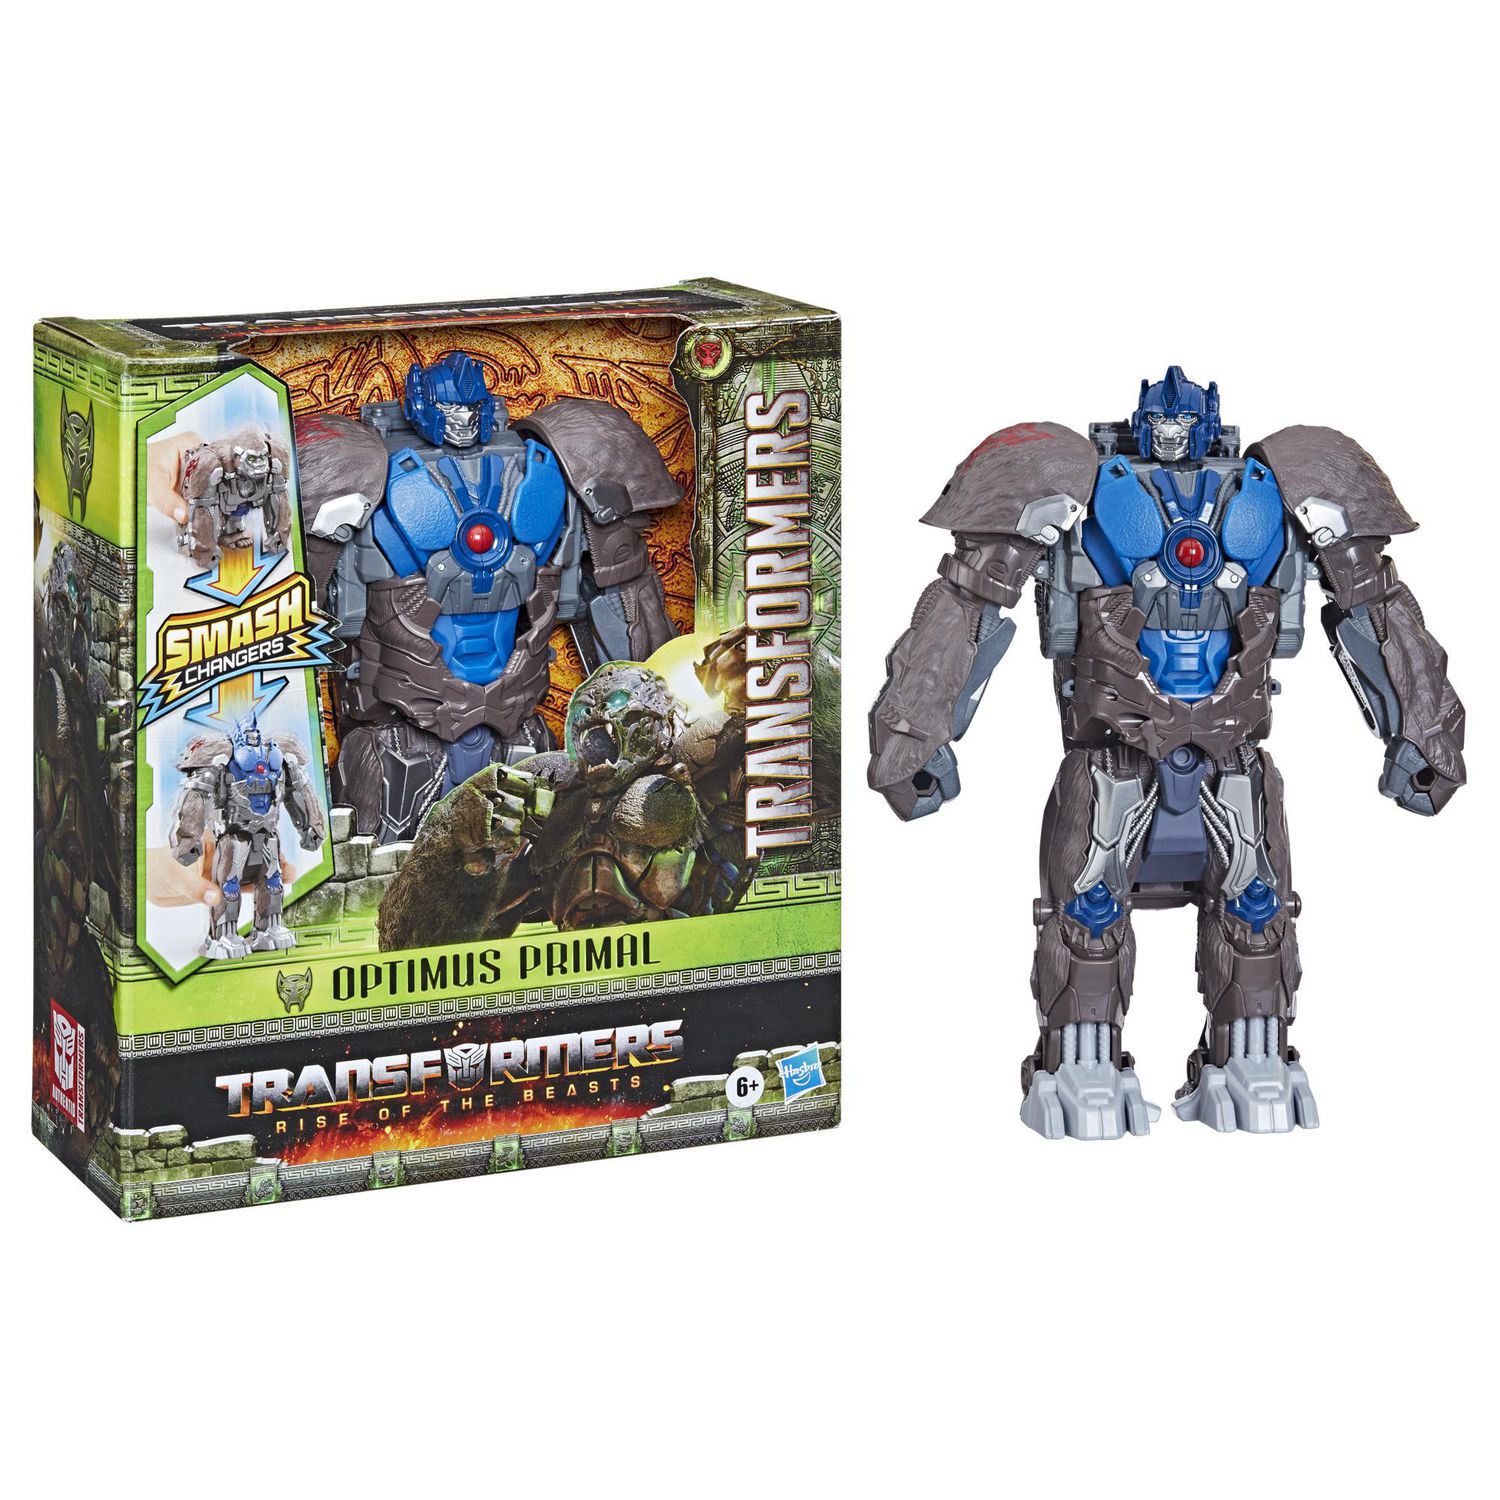 Transformers Toys Transformers: Rise of the Beasts Movie, Smash Changer Optimus  Primal Action Figure - Ages 6 and up, 9-inch 